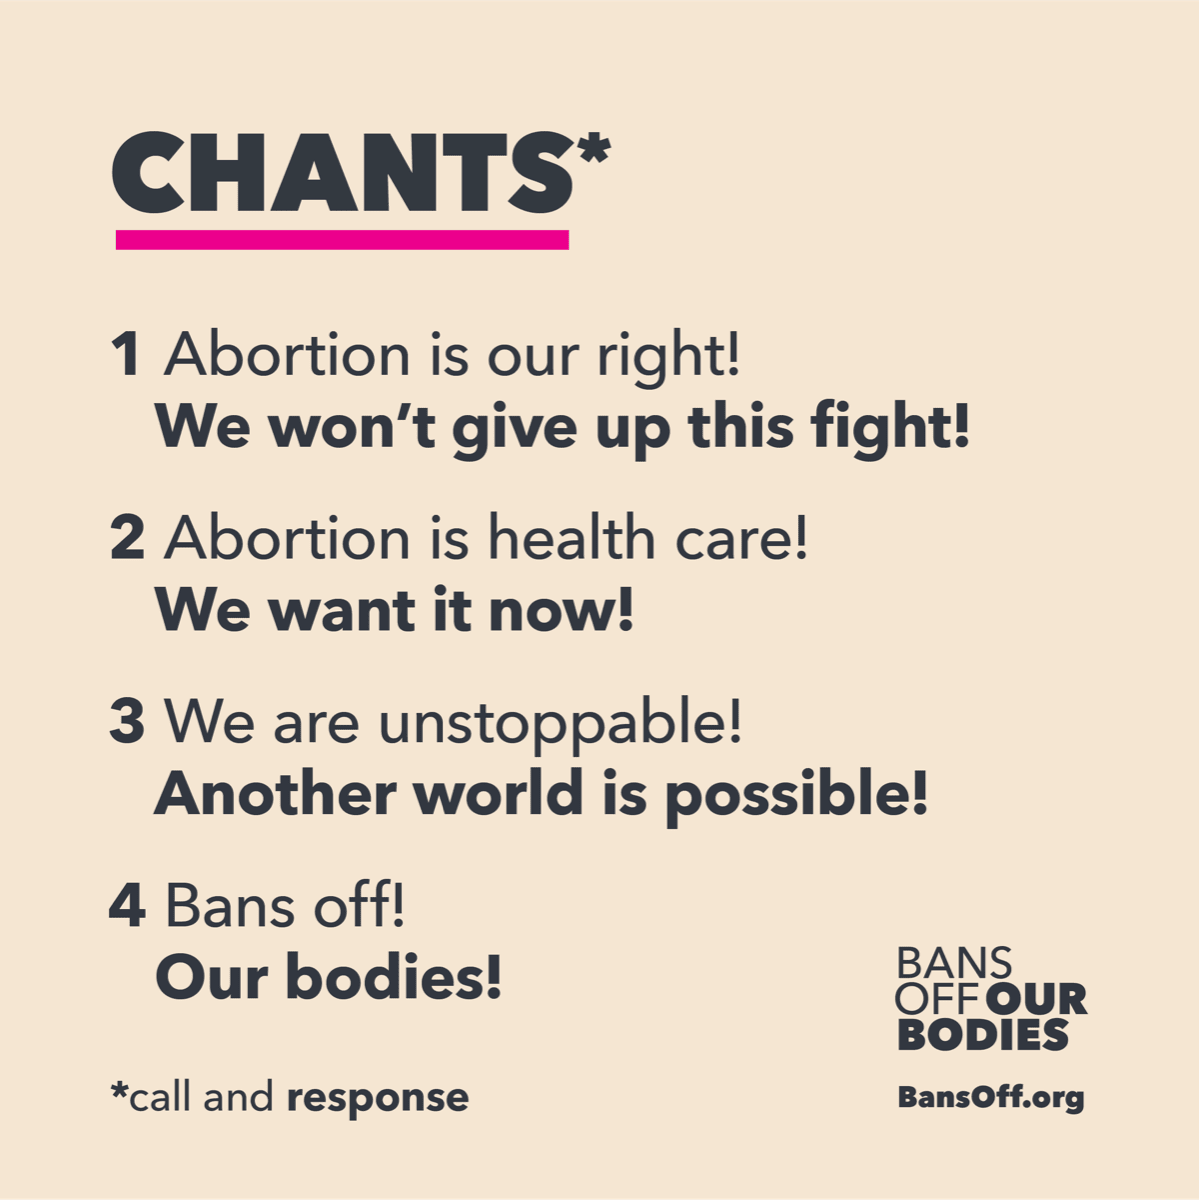 This is a list of call and response chants. The chants are 1 - Abortion is our right! We won't give up this fight! 2 - Abortion is health care! We want it now! 3 - We are unstoppable! Another world is possible! 4- Bans off! Our bodies